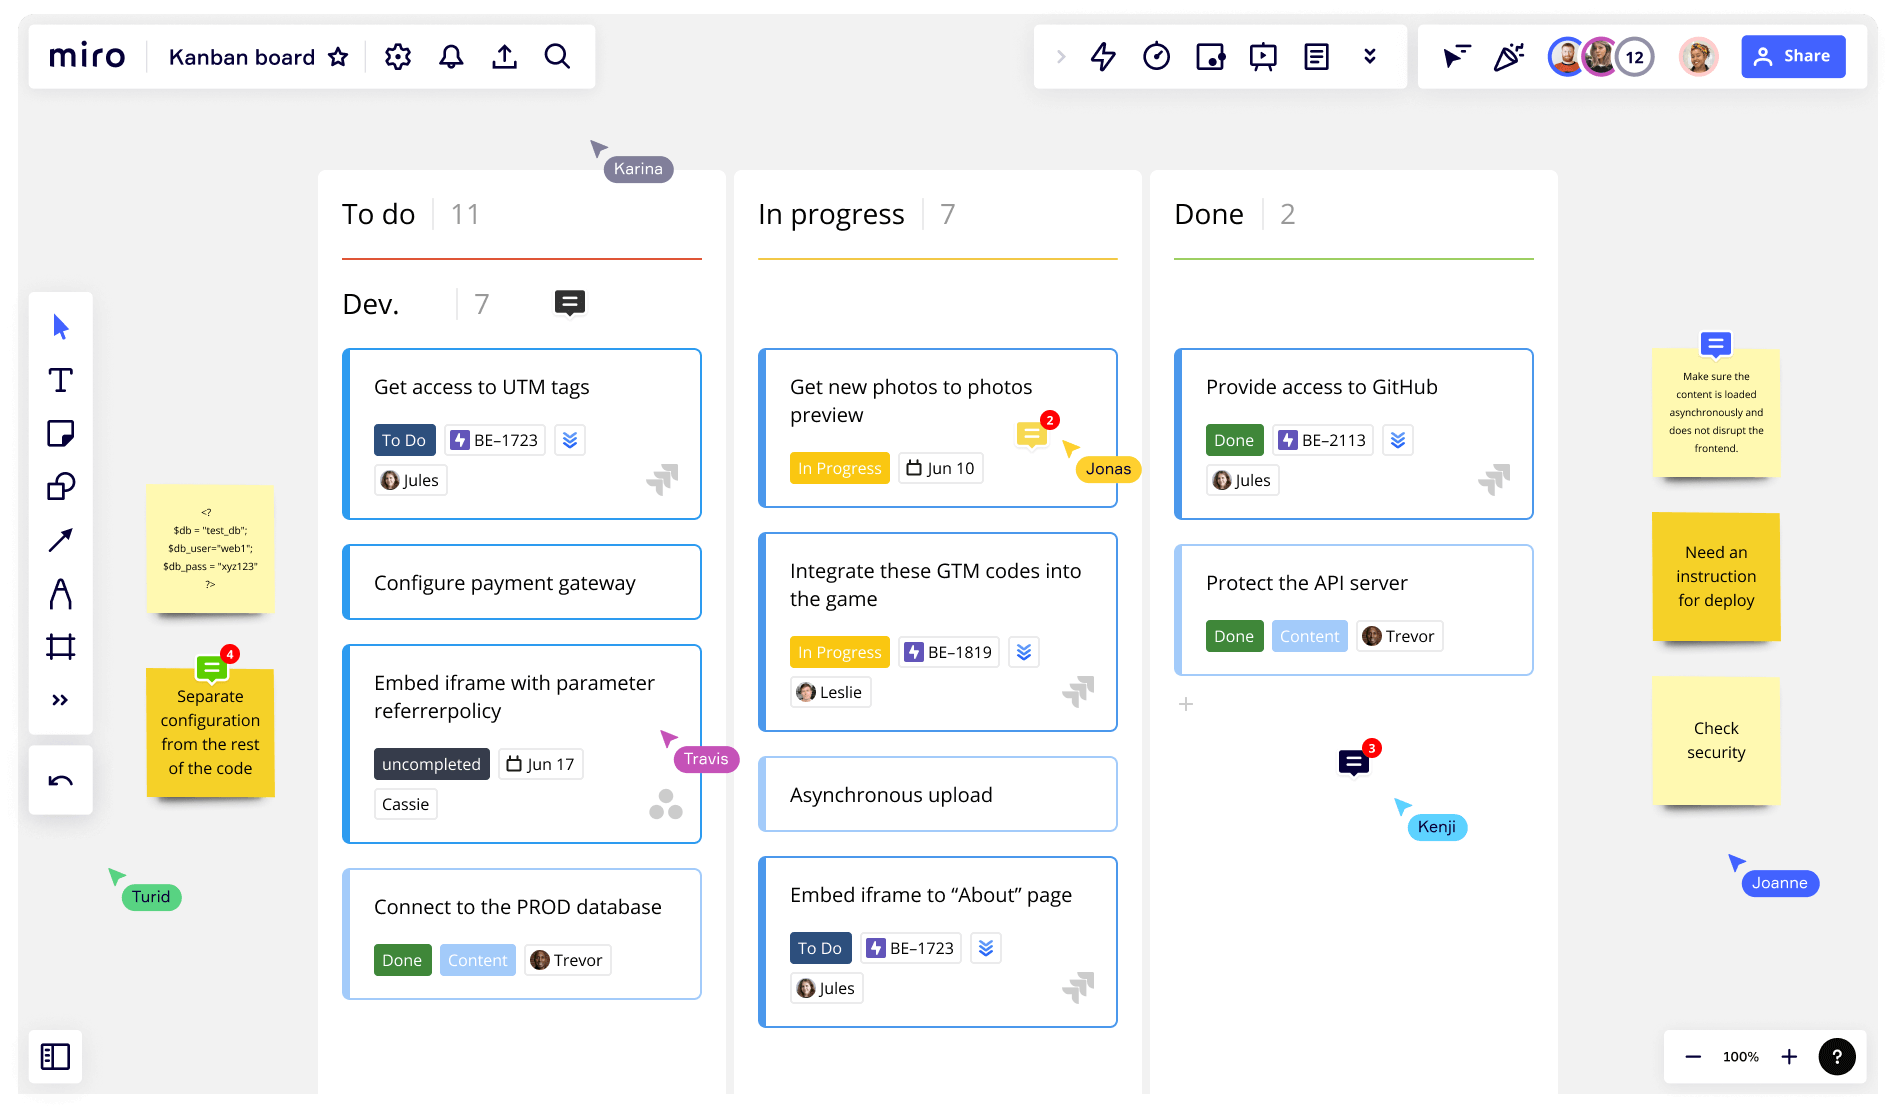 Example of a Kanban board on Miro